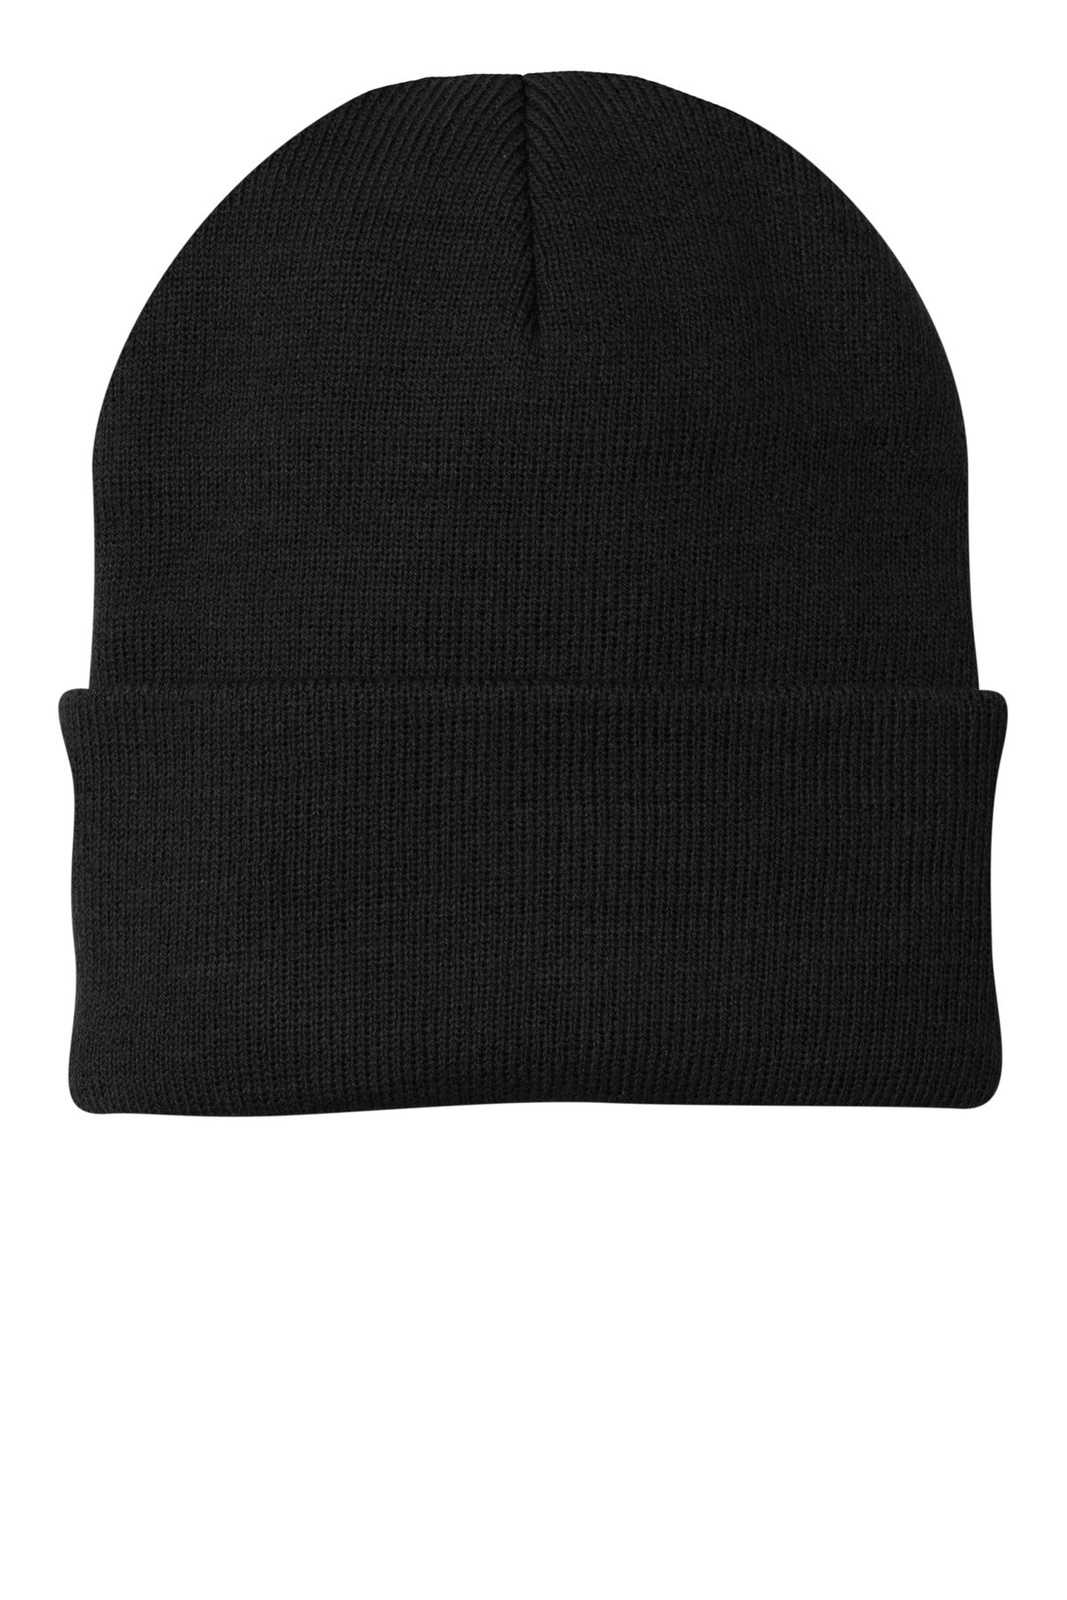 Port & Company CP90 Knit Cap with Cuff - Black - HIT a Double - 1